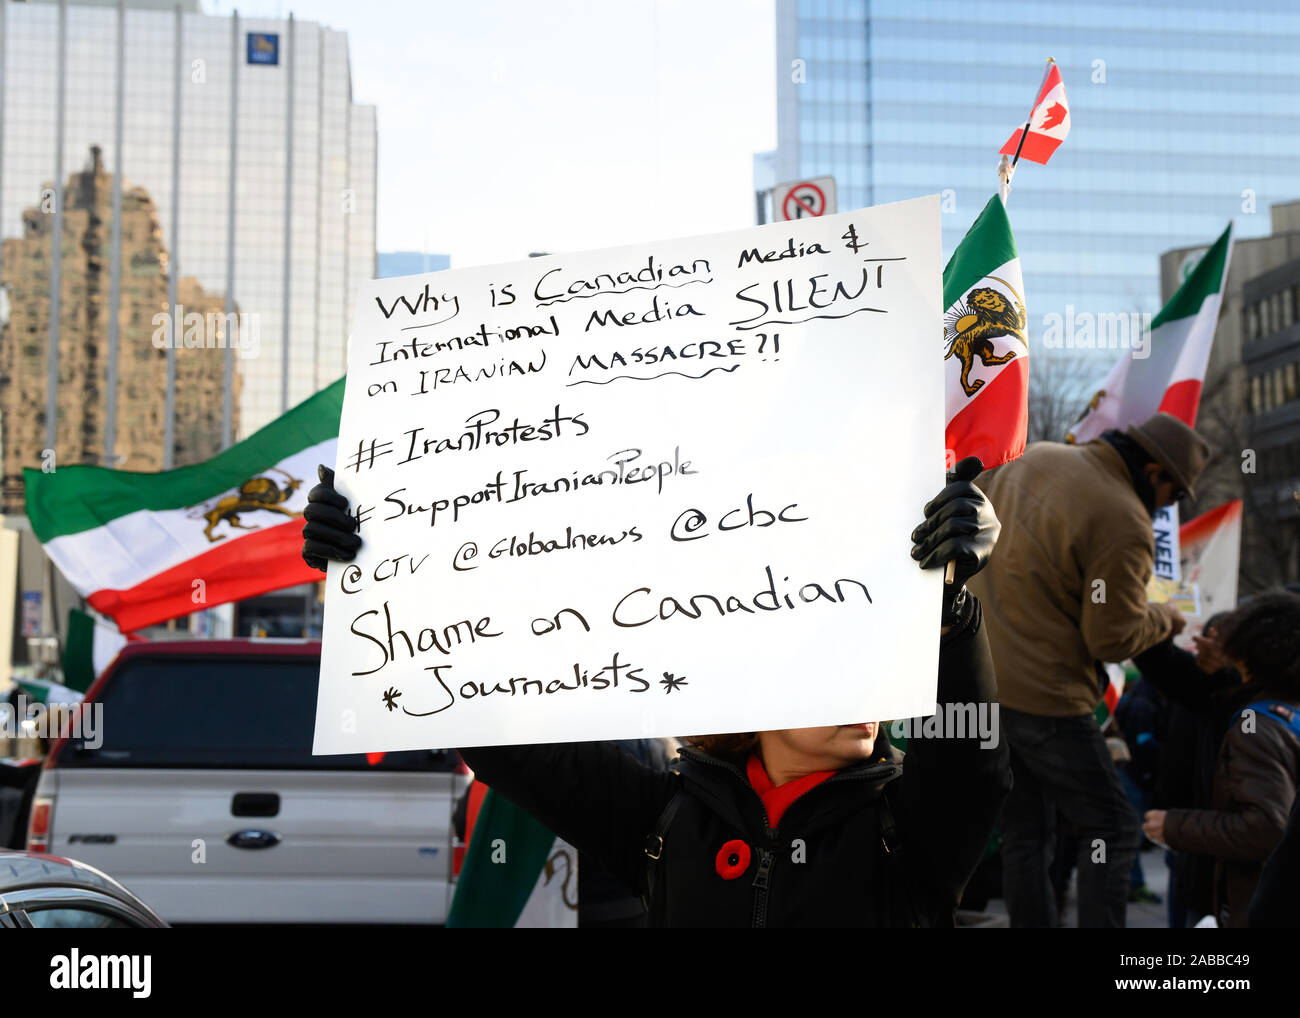 Torontonians gather at Mel Lastman Square in support of the protesters in Iran while condemning Canadian media for their silence. Stock Photo